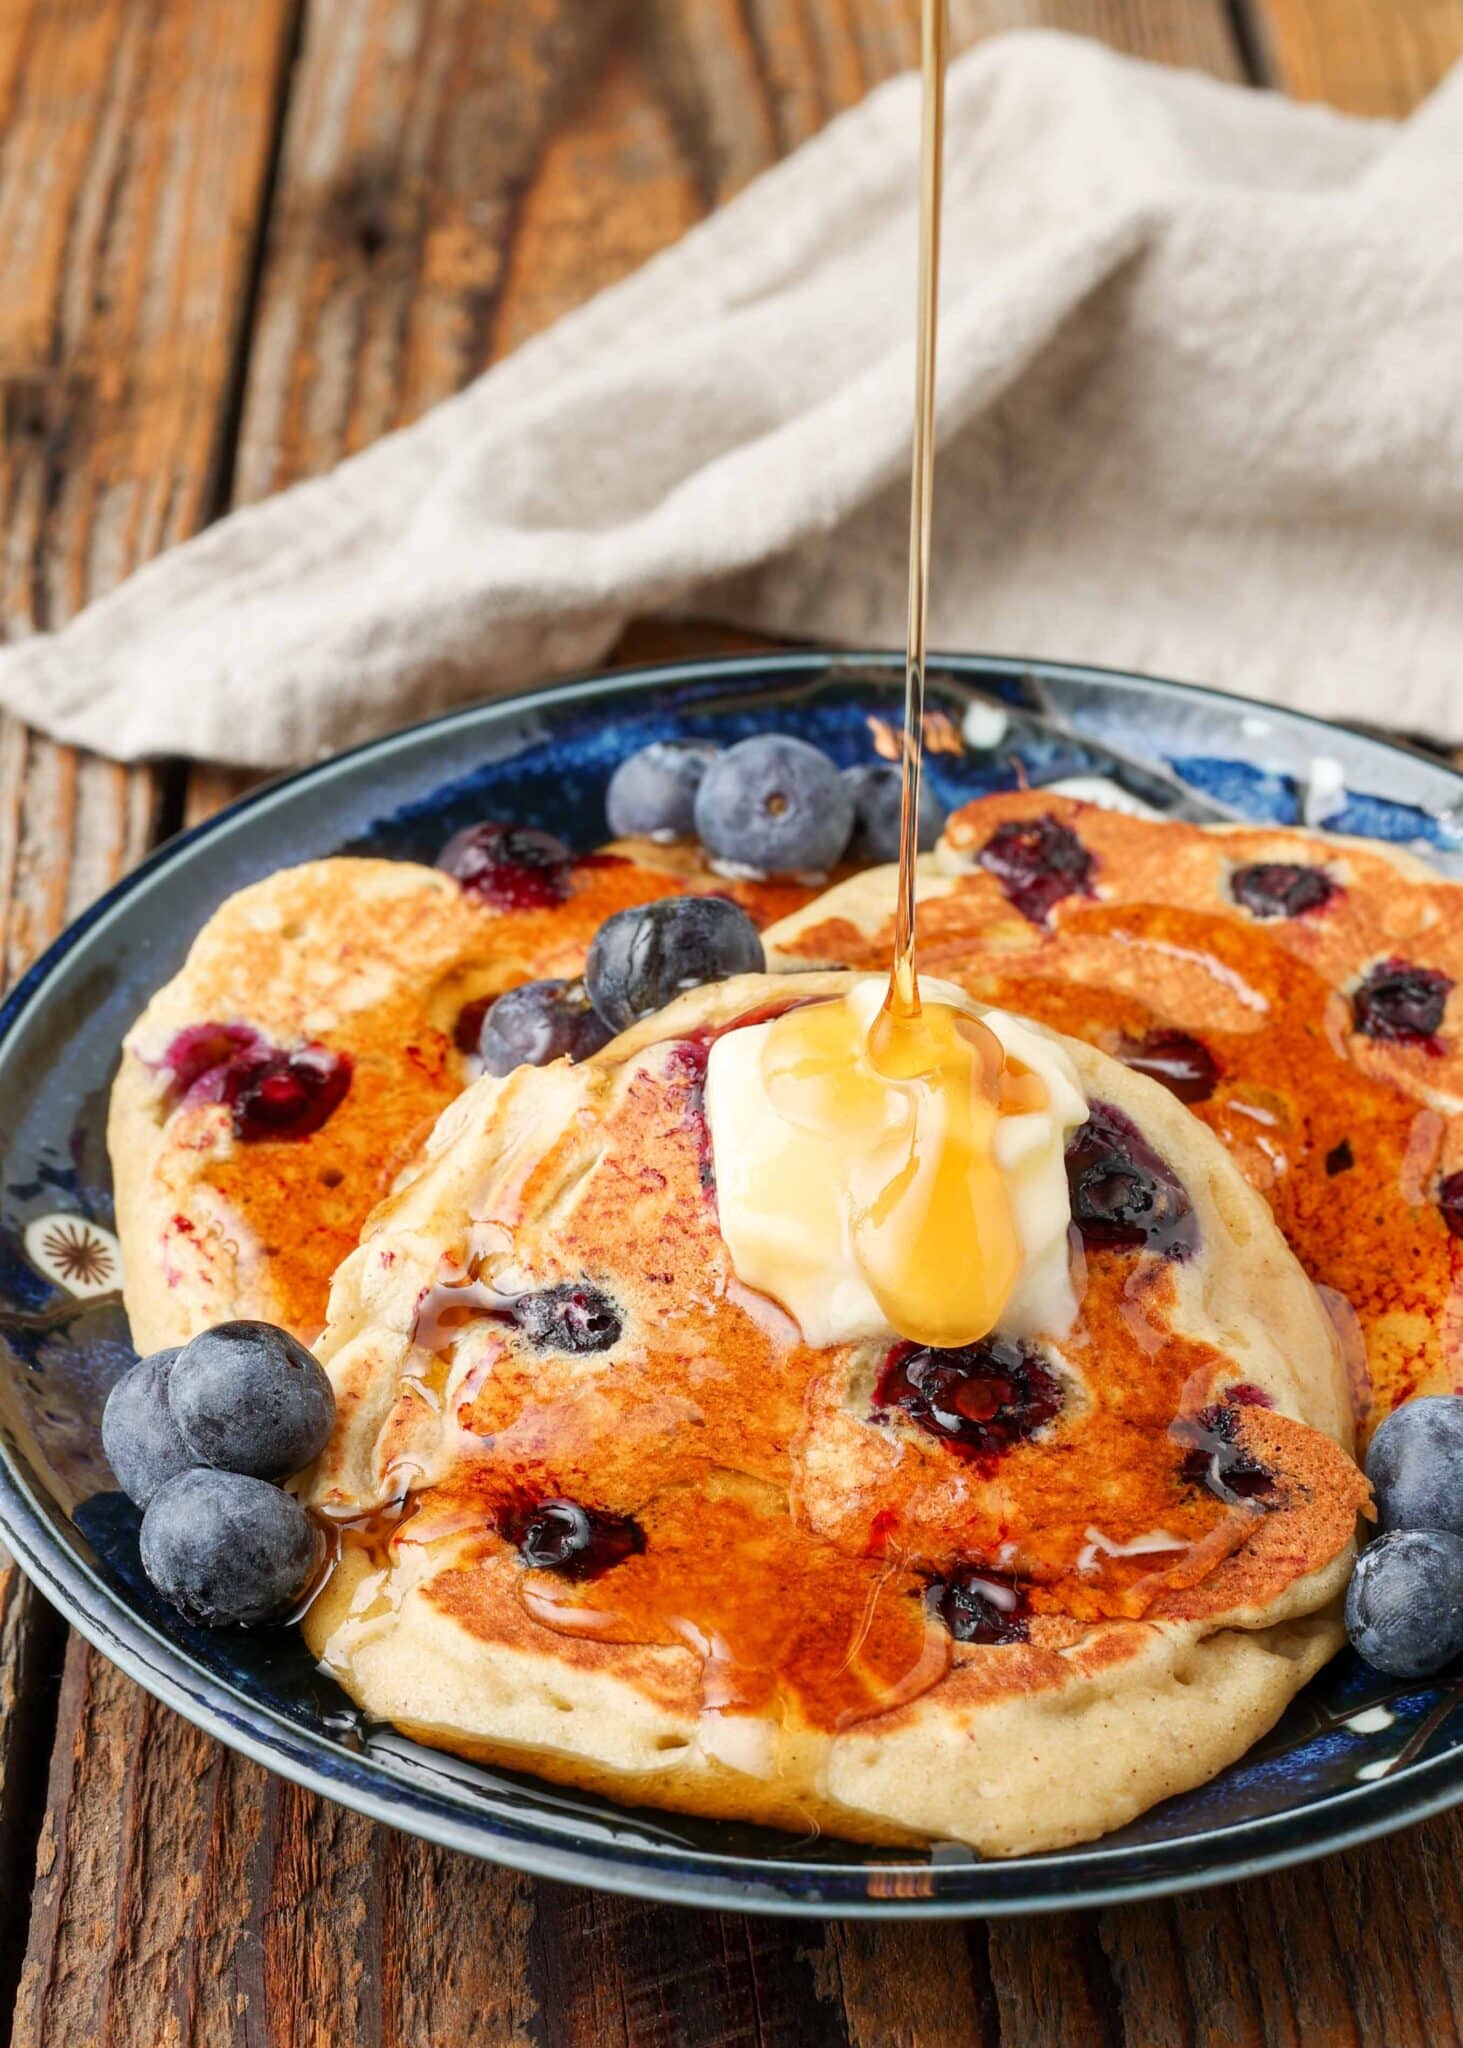 banana pancakes with blueberries on plate with butter and syrup